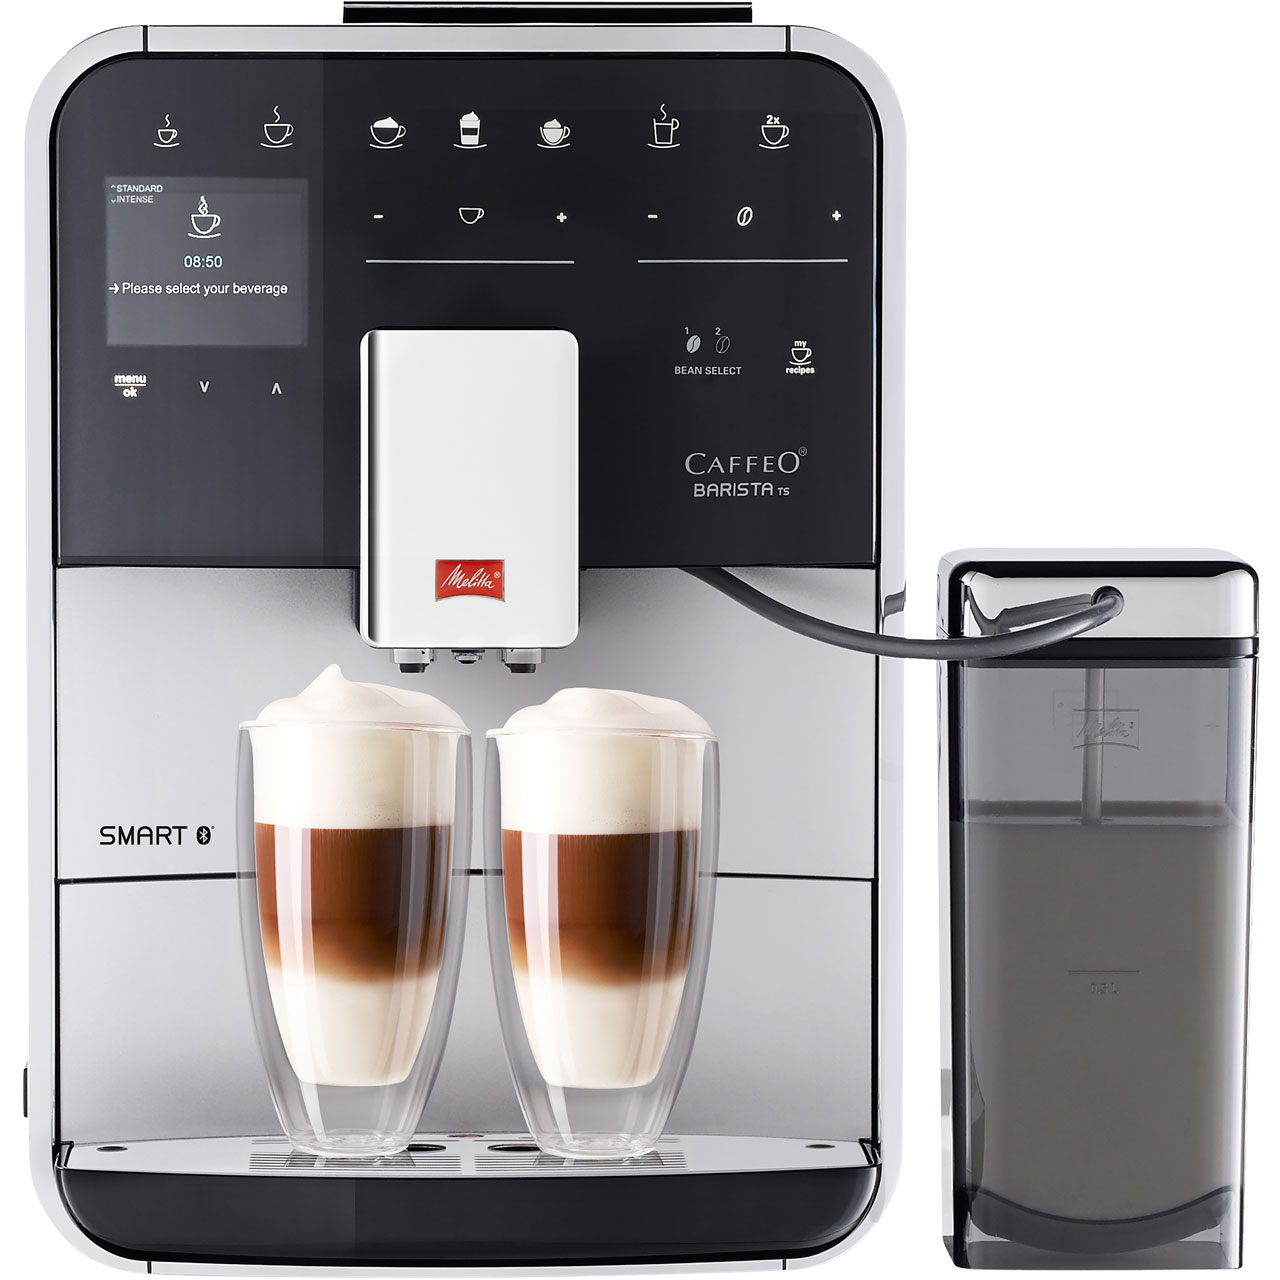 Melitta Barista TS Smart 6764548 Bean to Cup Coffee Machine Review